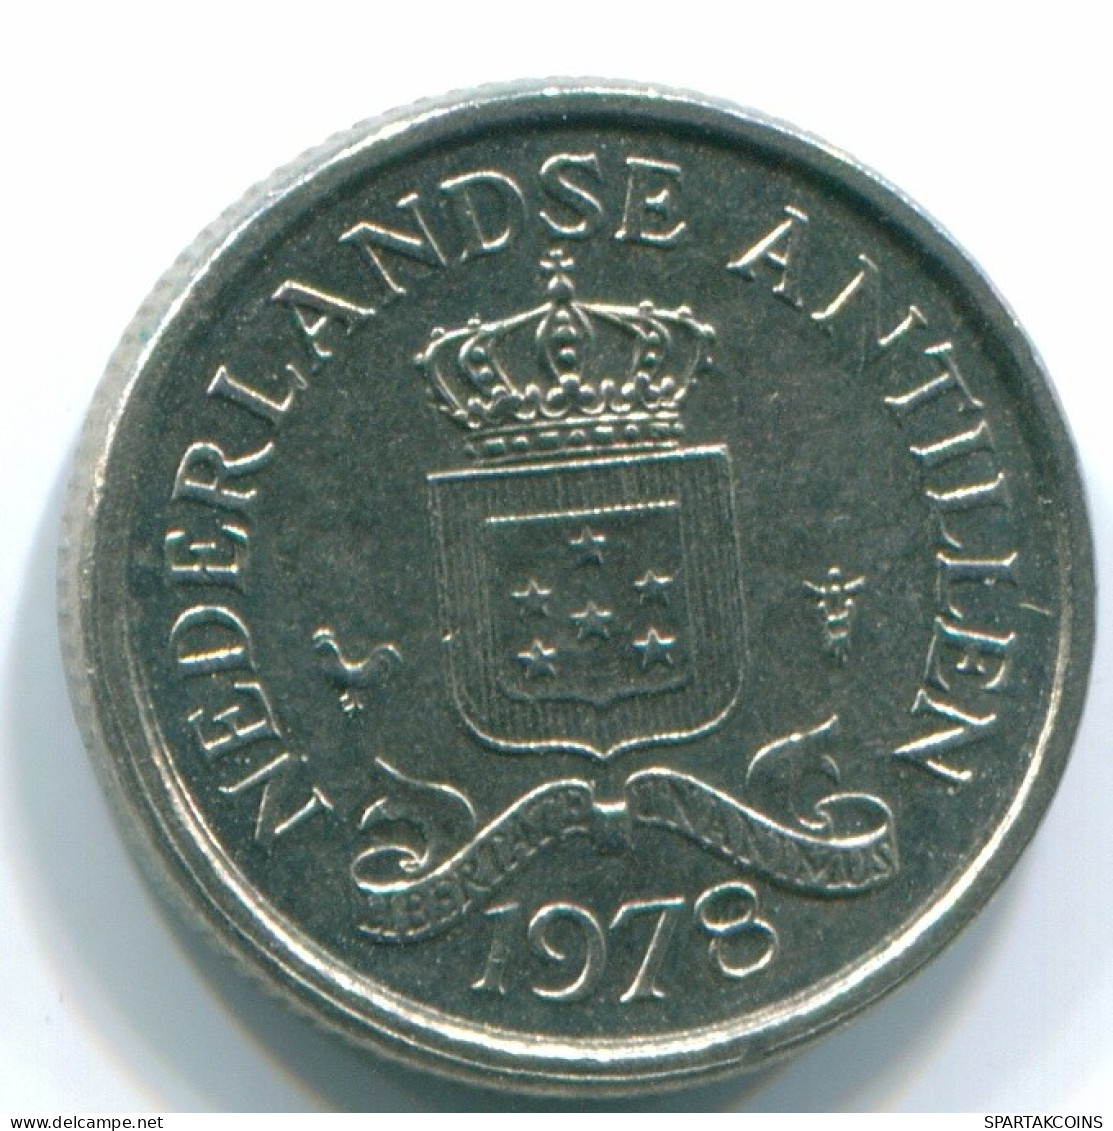 10 CENTS 1978 NETHERLANDS ANTILLES Nickel Colonial Coin #S13548.U.A - Netherlands Antilles